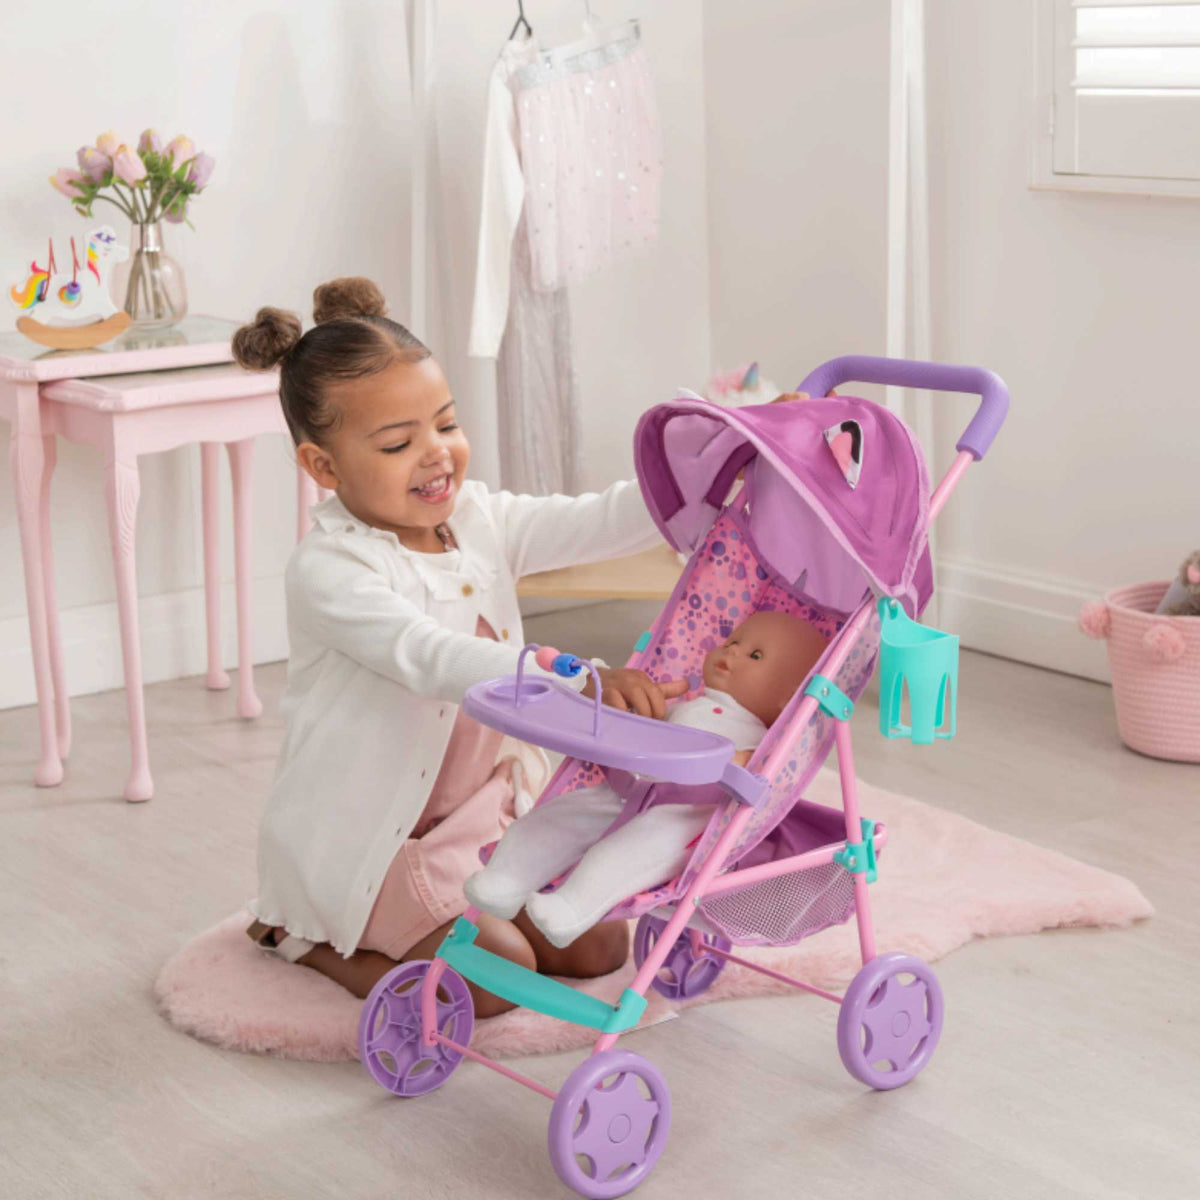 Bright and fun toy pushchair inspired by Gabby&#39;s Dollhouse, ideal for kids to push their favourite dolls and toys. Features a durable frame, smooth-rolling wheels, and colourful designs with beloved characters from the series.